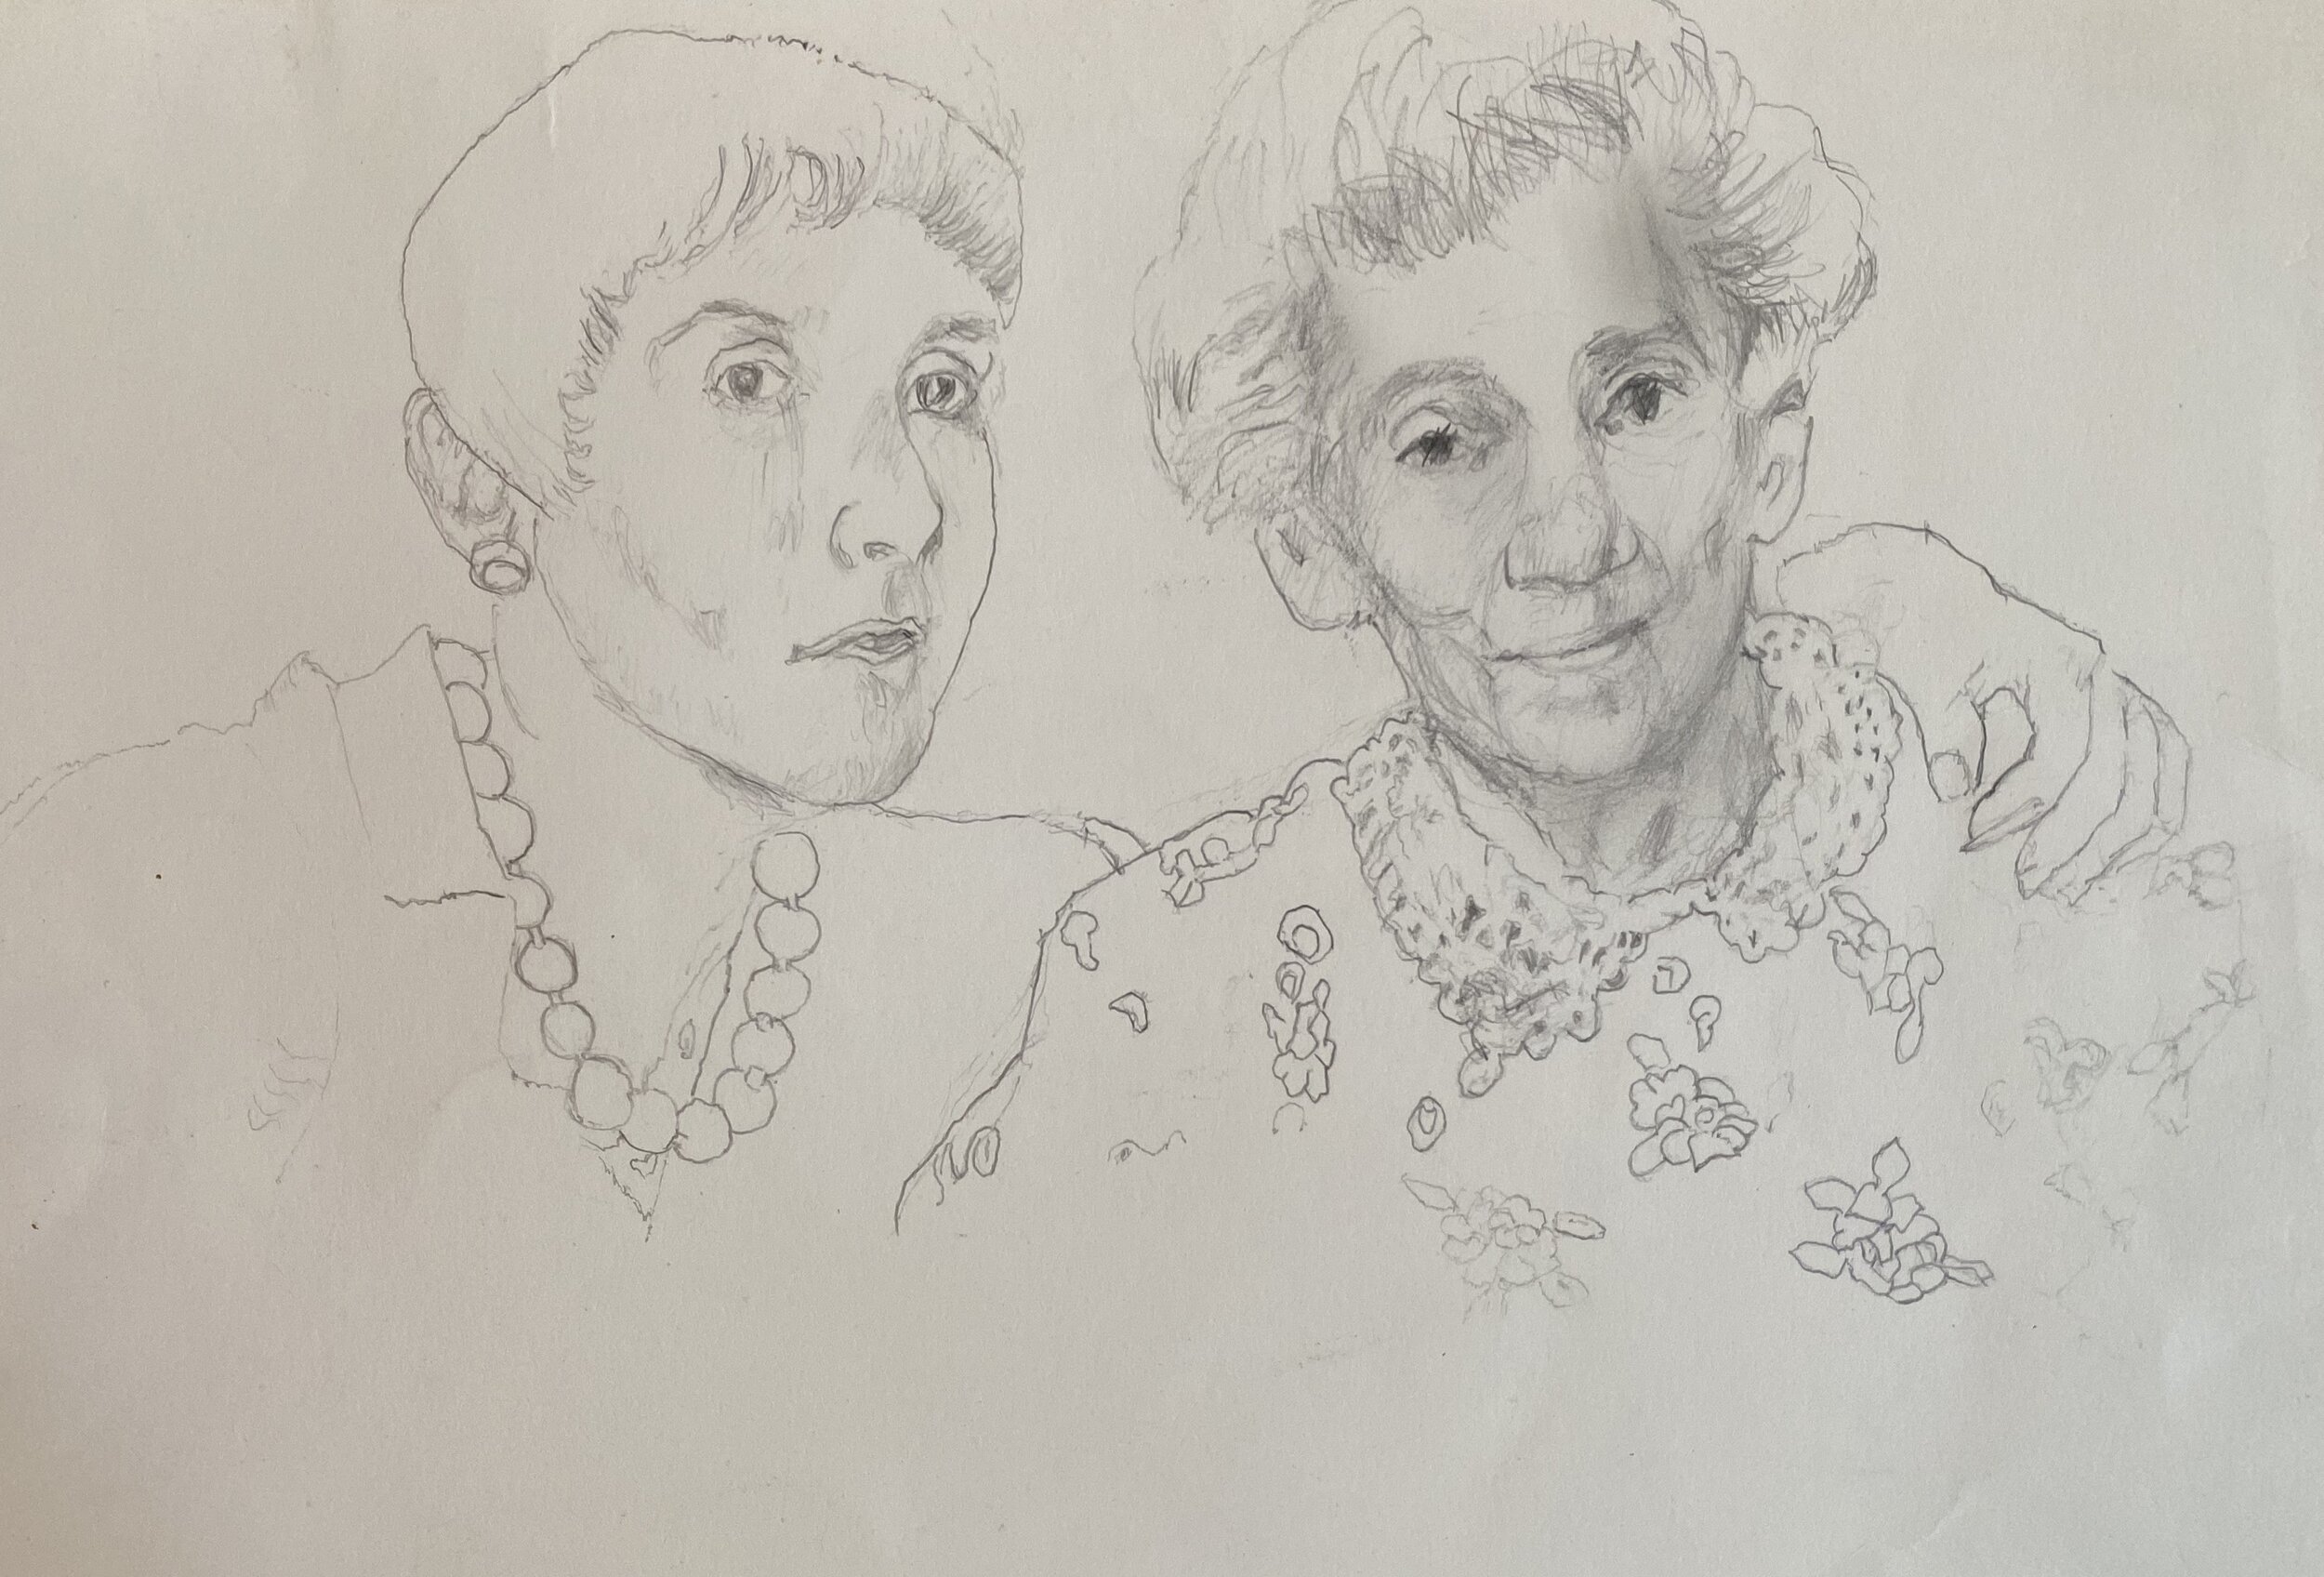   Description:  Katherine with her mother   Medium:  Pencil on paper   Dimensions:   H: 9 in W: 12 in 